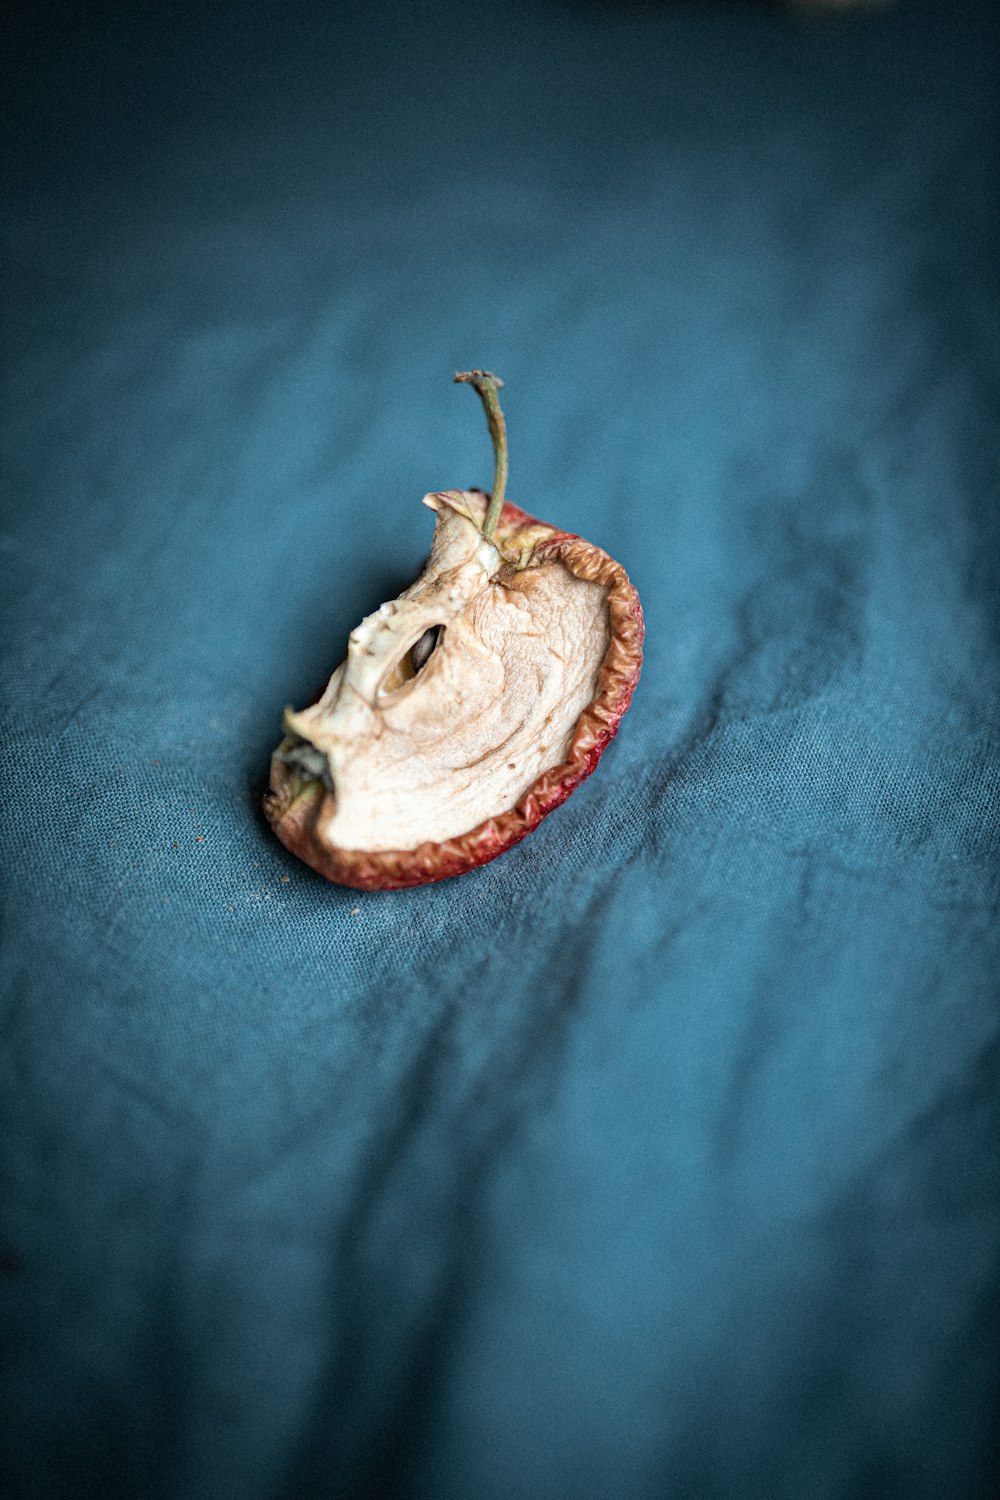 white and brown round fruit on blue textile